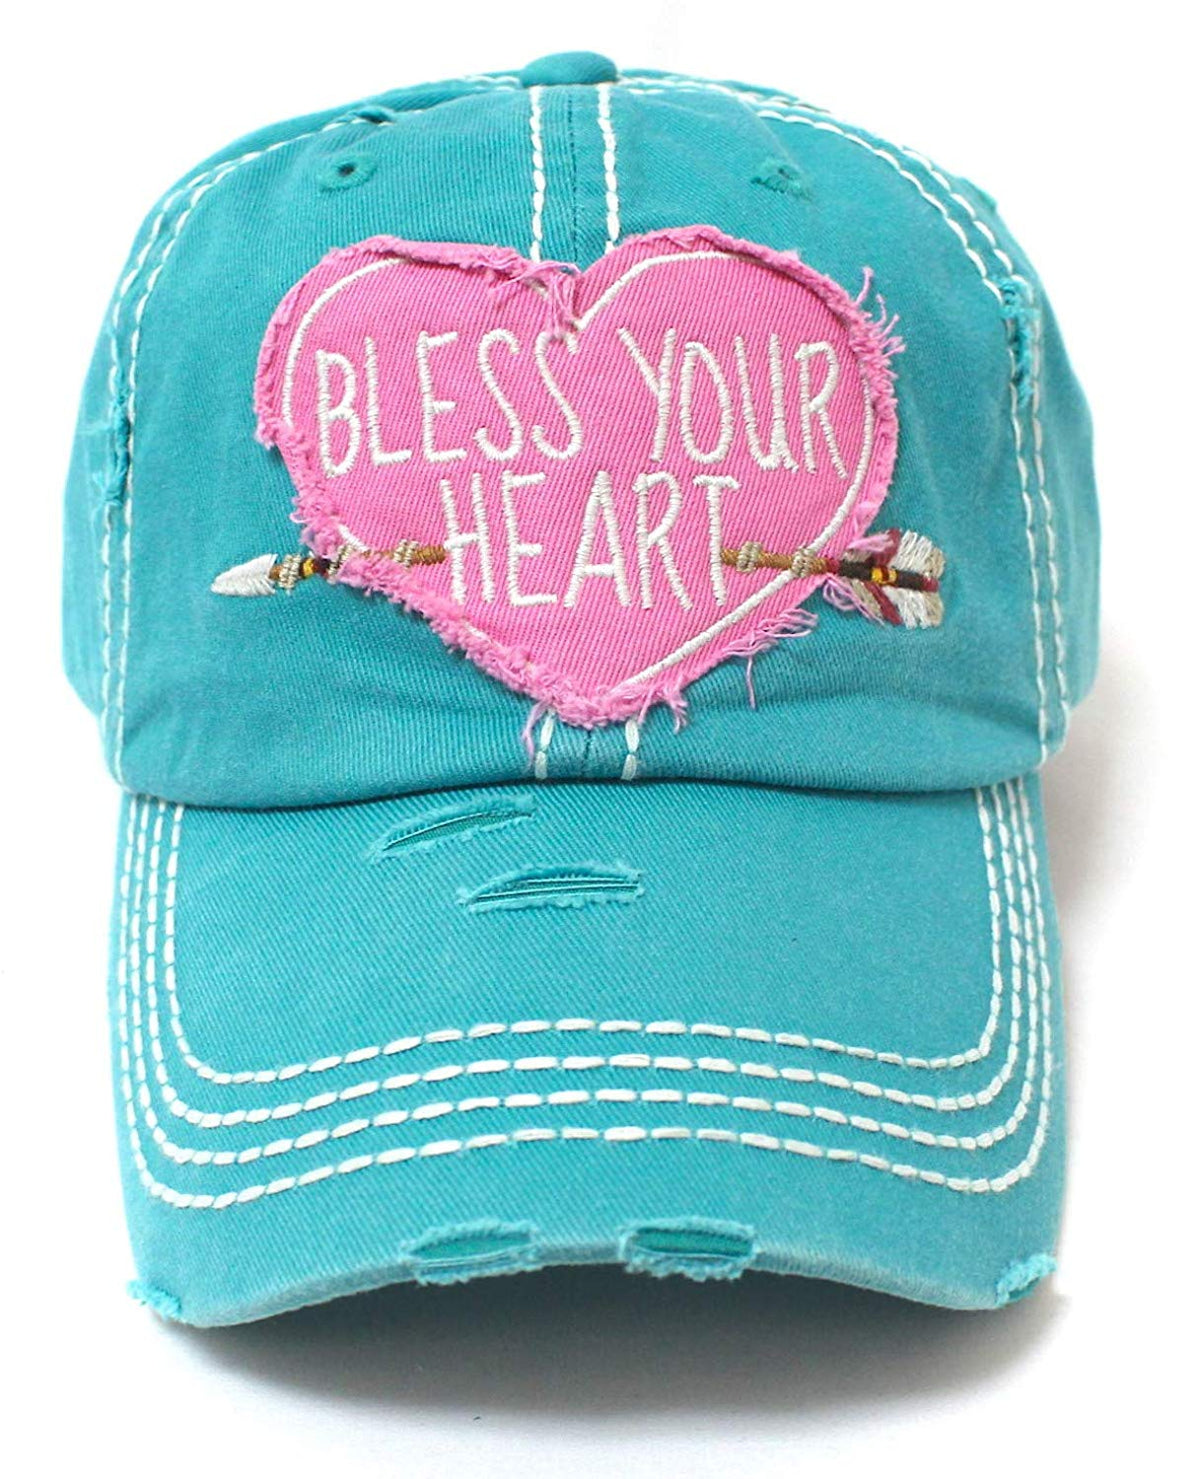 New!! Turquoise Heart & Arrow Bless Your Heart Vintage Hat - Caps 'N Vintage 